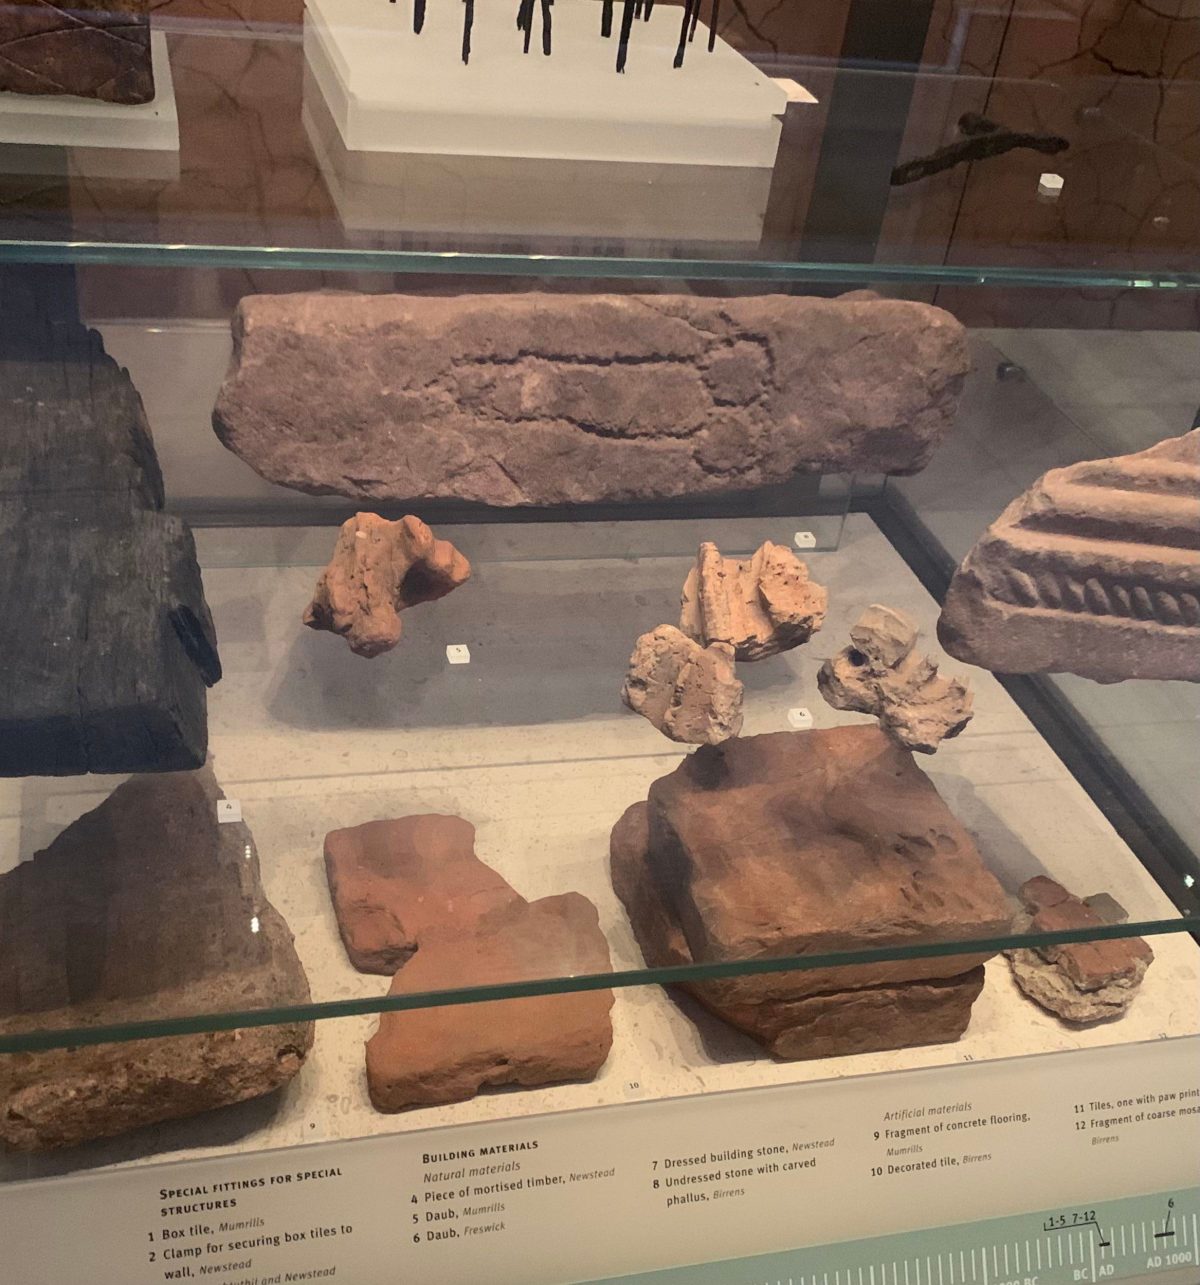 The brick with the carved penis in it, on exhibit at the National Museum of Scotland.